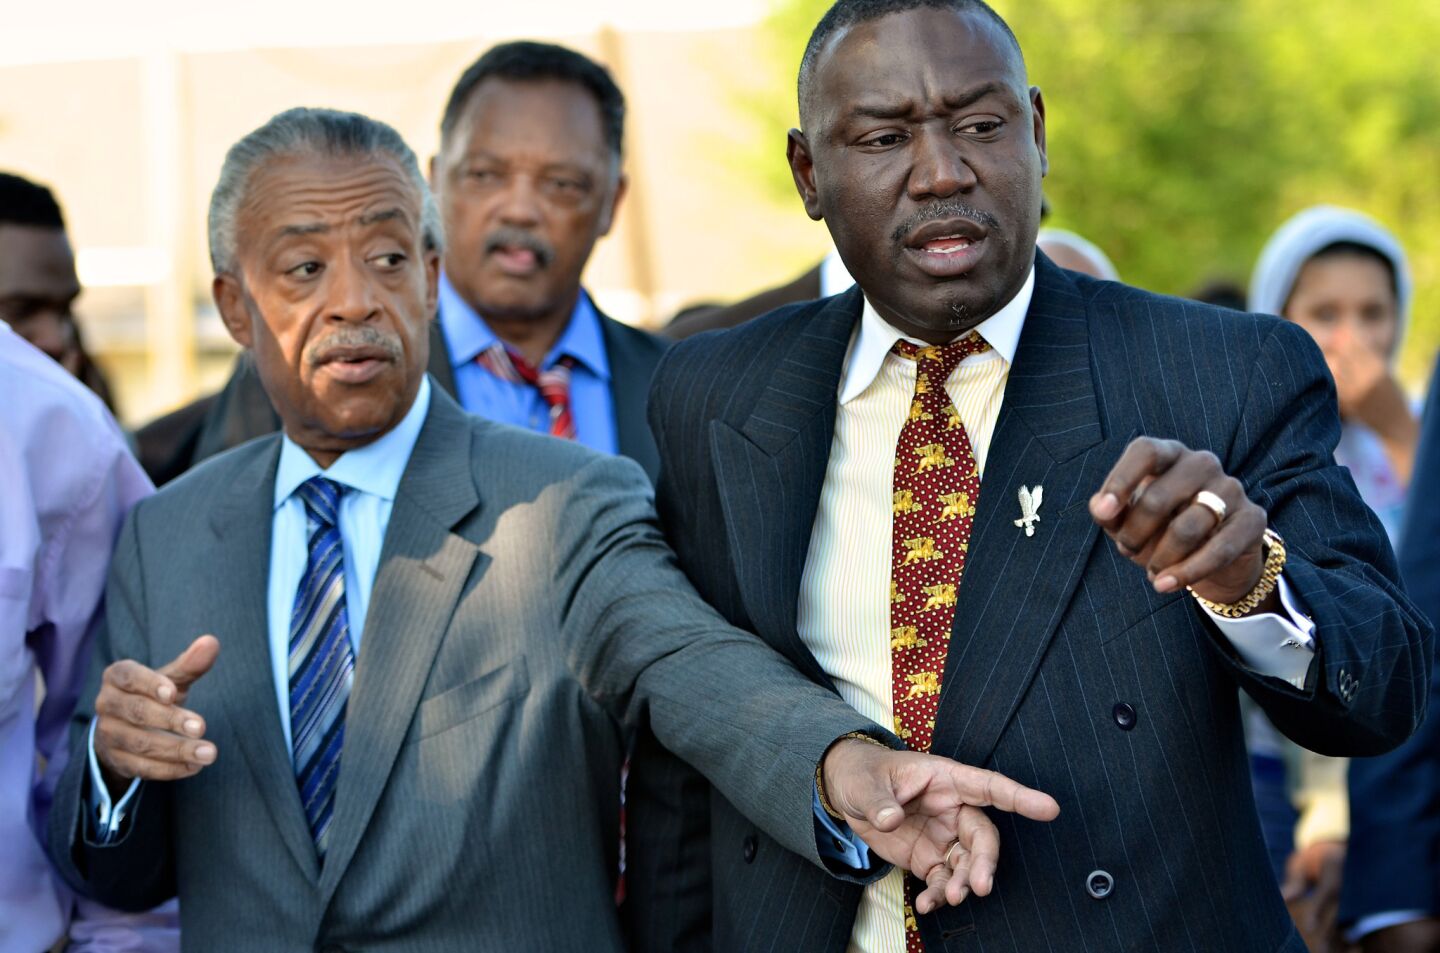 The Rev. Al Sharpton, Jesse Jackson and Benjamin Crump, attorney for the Trayvon Martin family, join together in Sanford on March 26. More: Demanding George Zimmerman be arrested